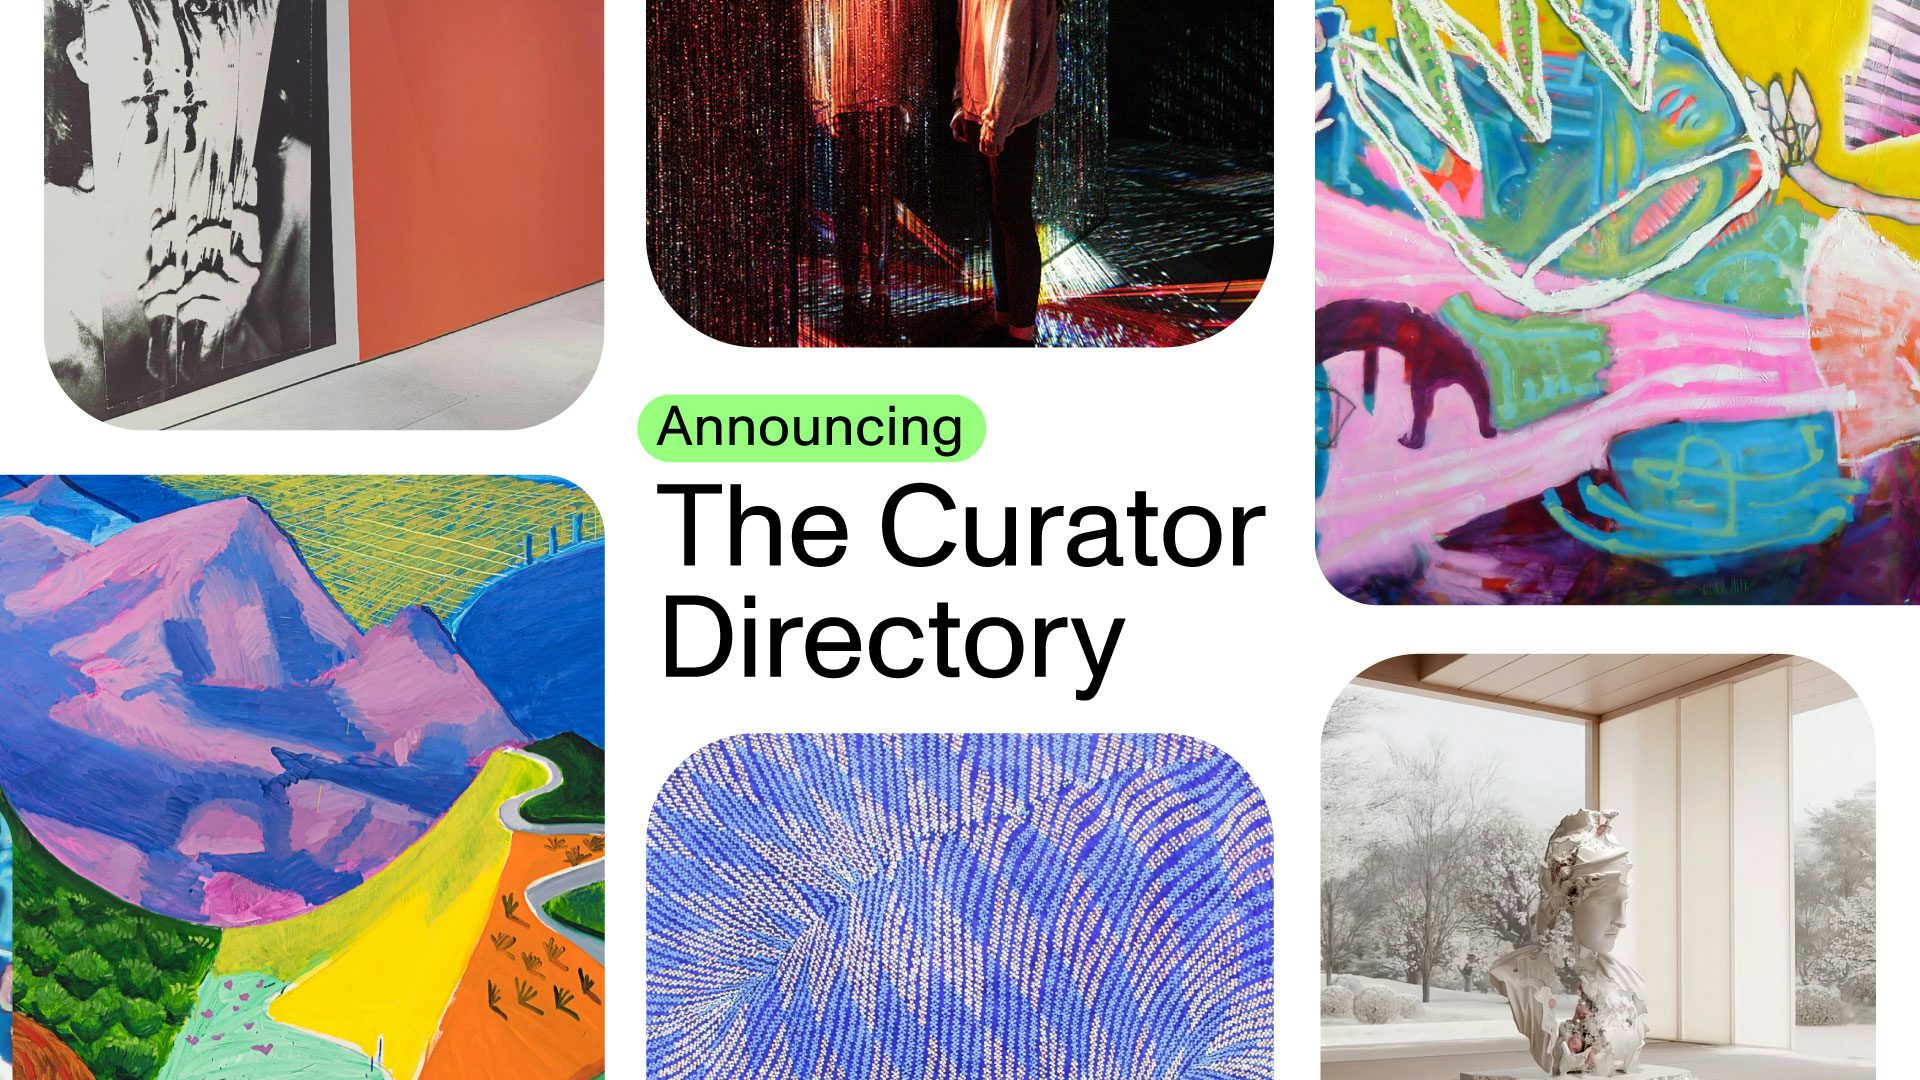 Our Curator Director launches next week